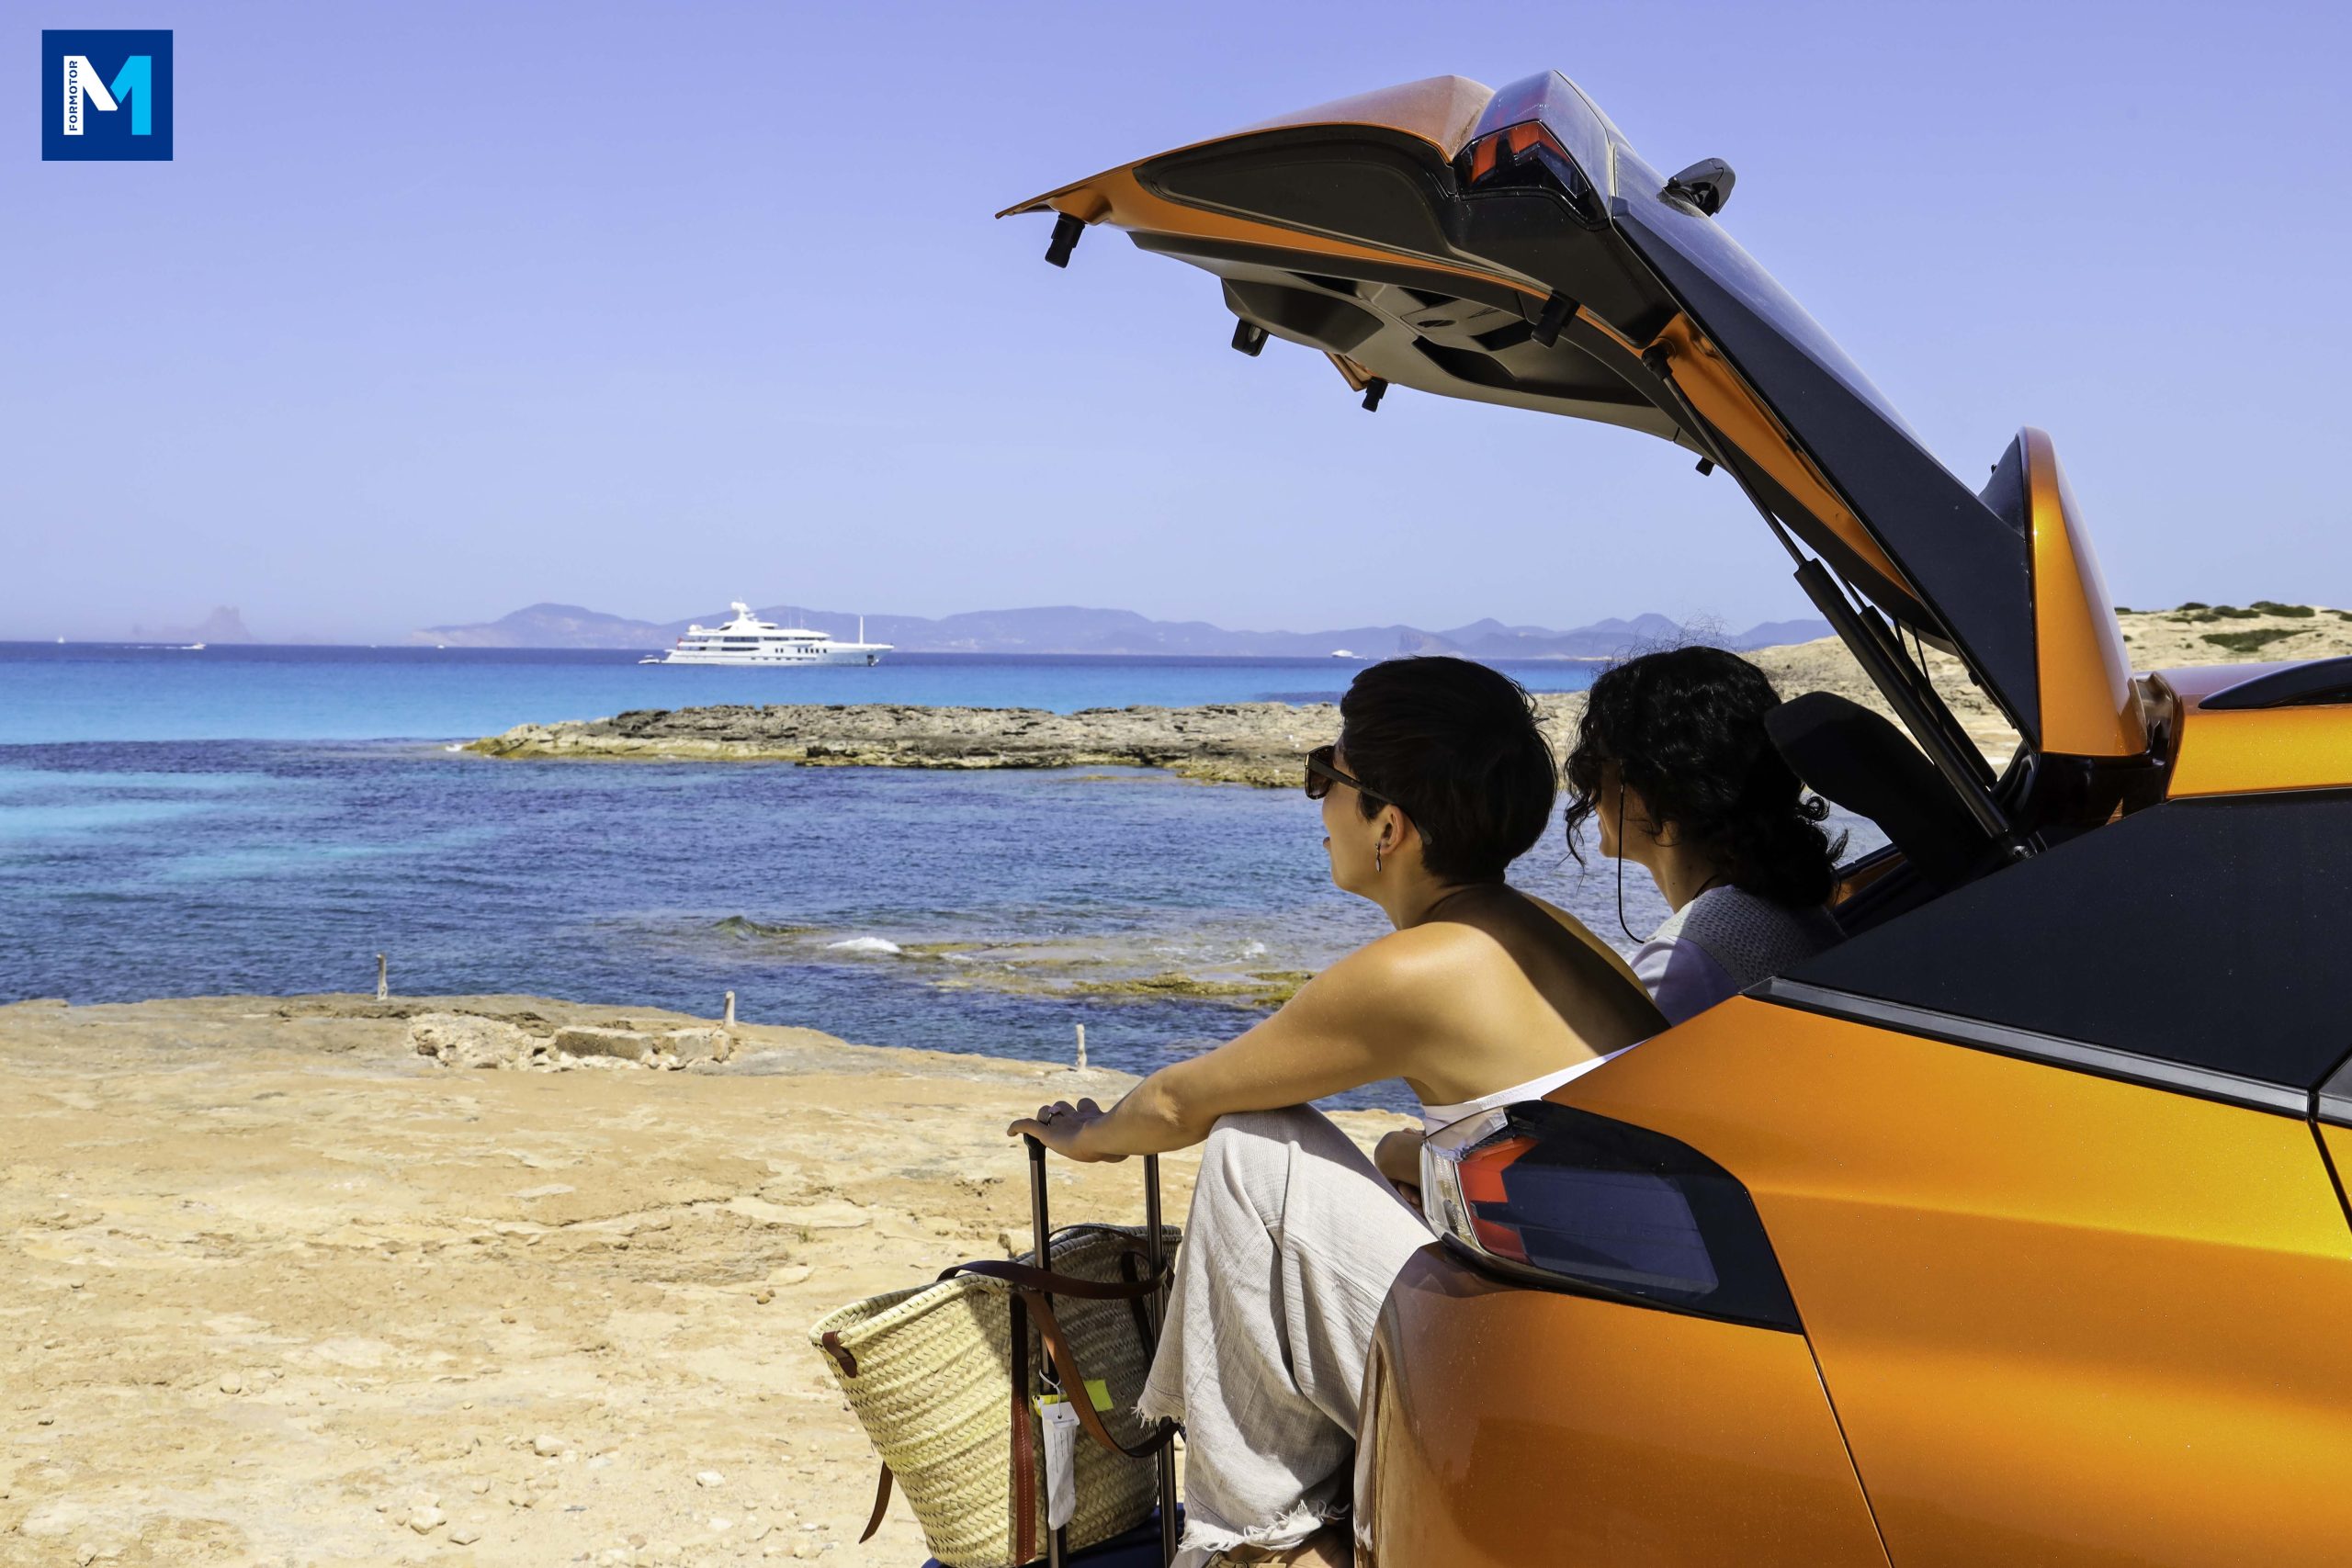 Why go to the Caribbean when Formentera exists? Formotor